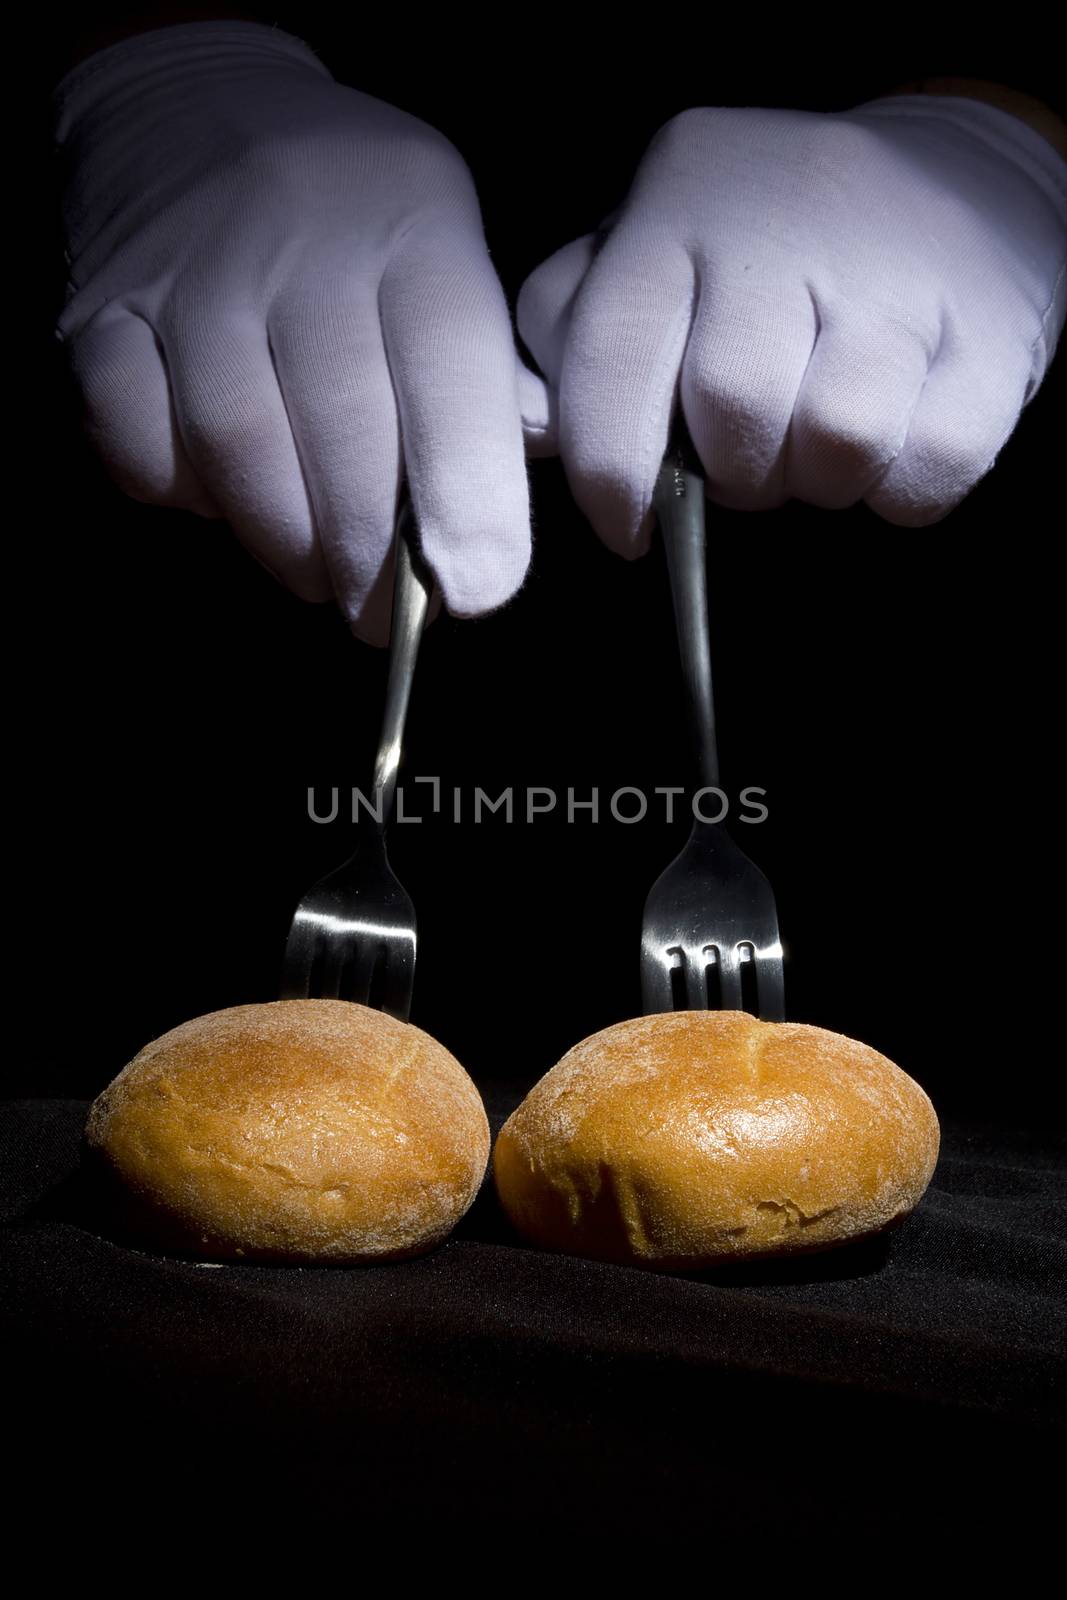 Buns on the forks and hands in white gloves on a black background